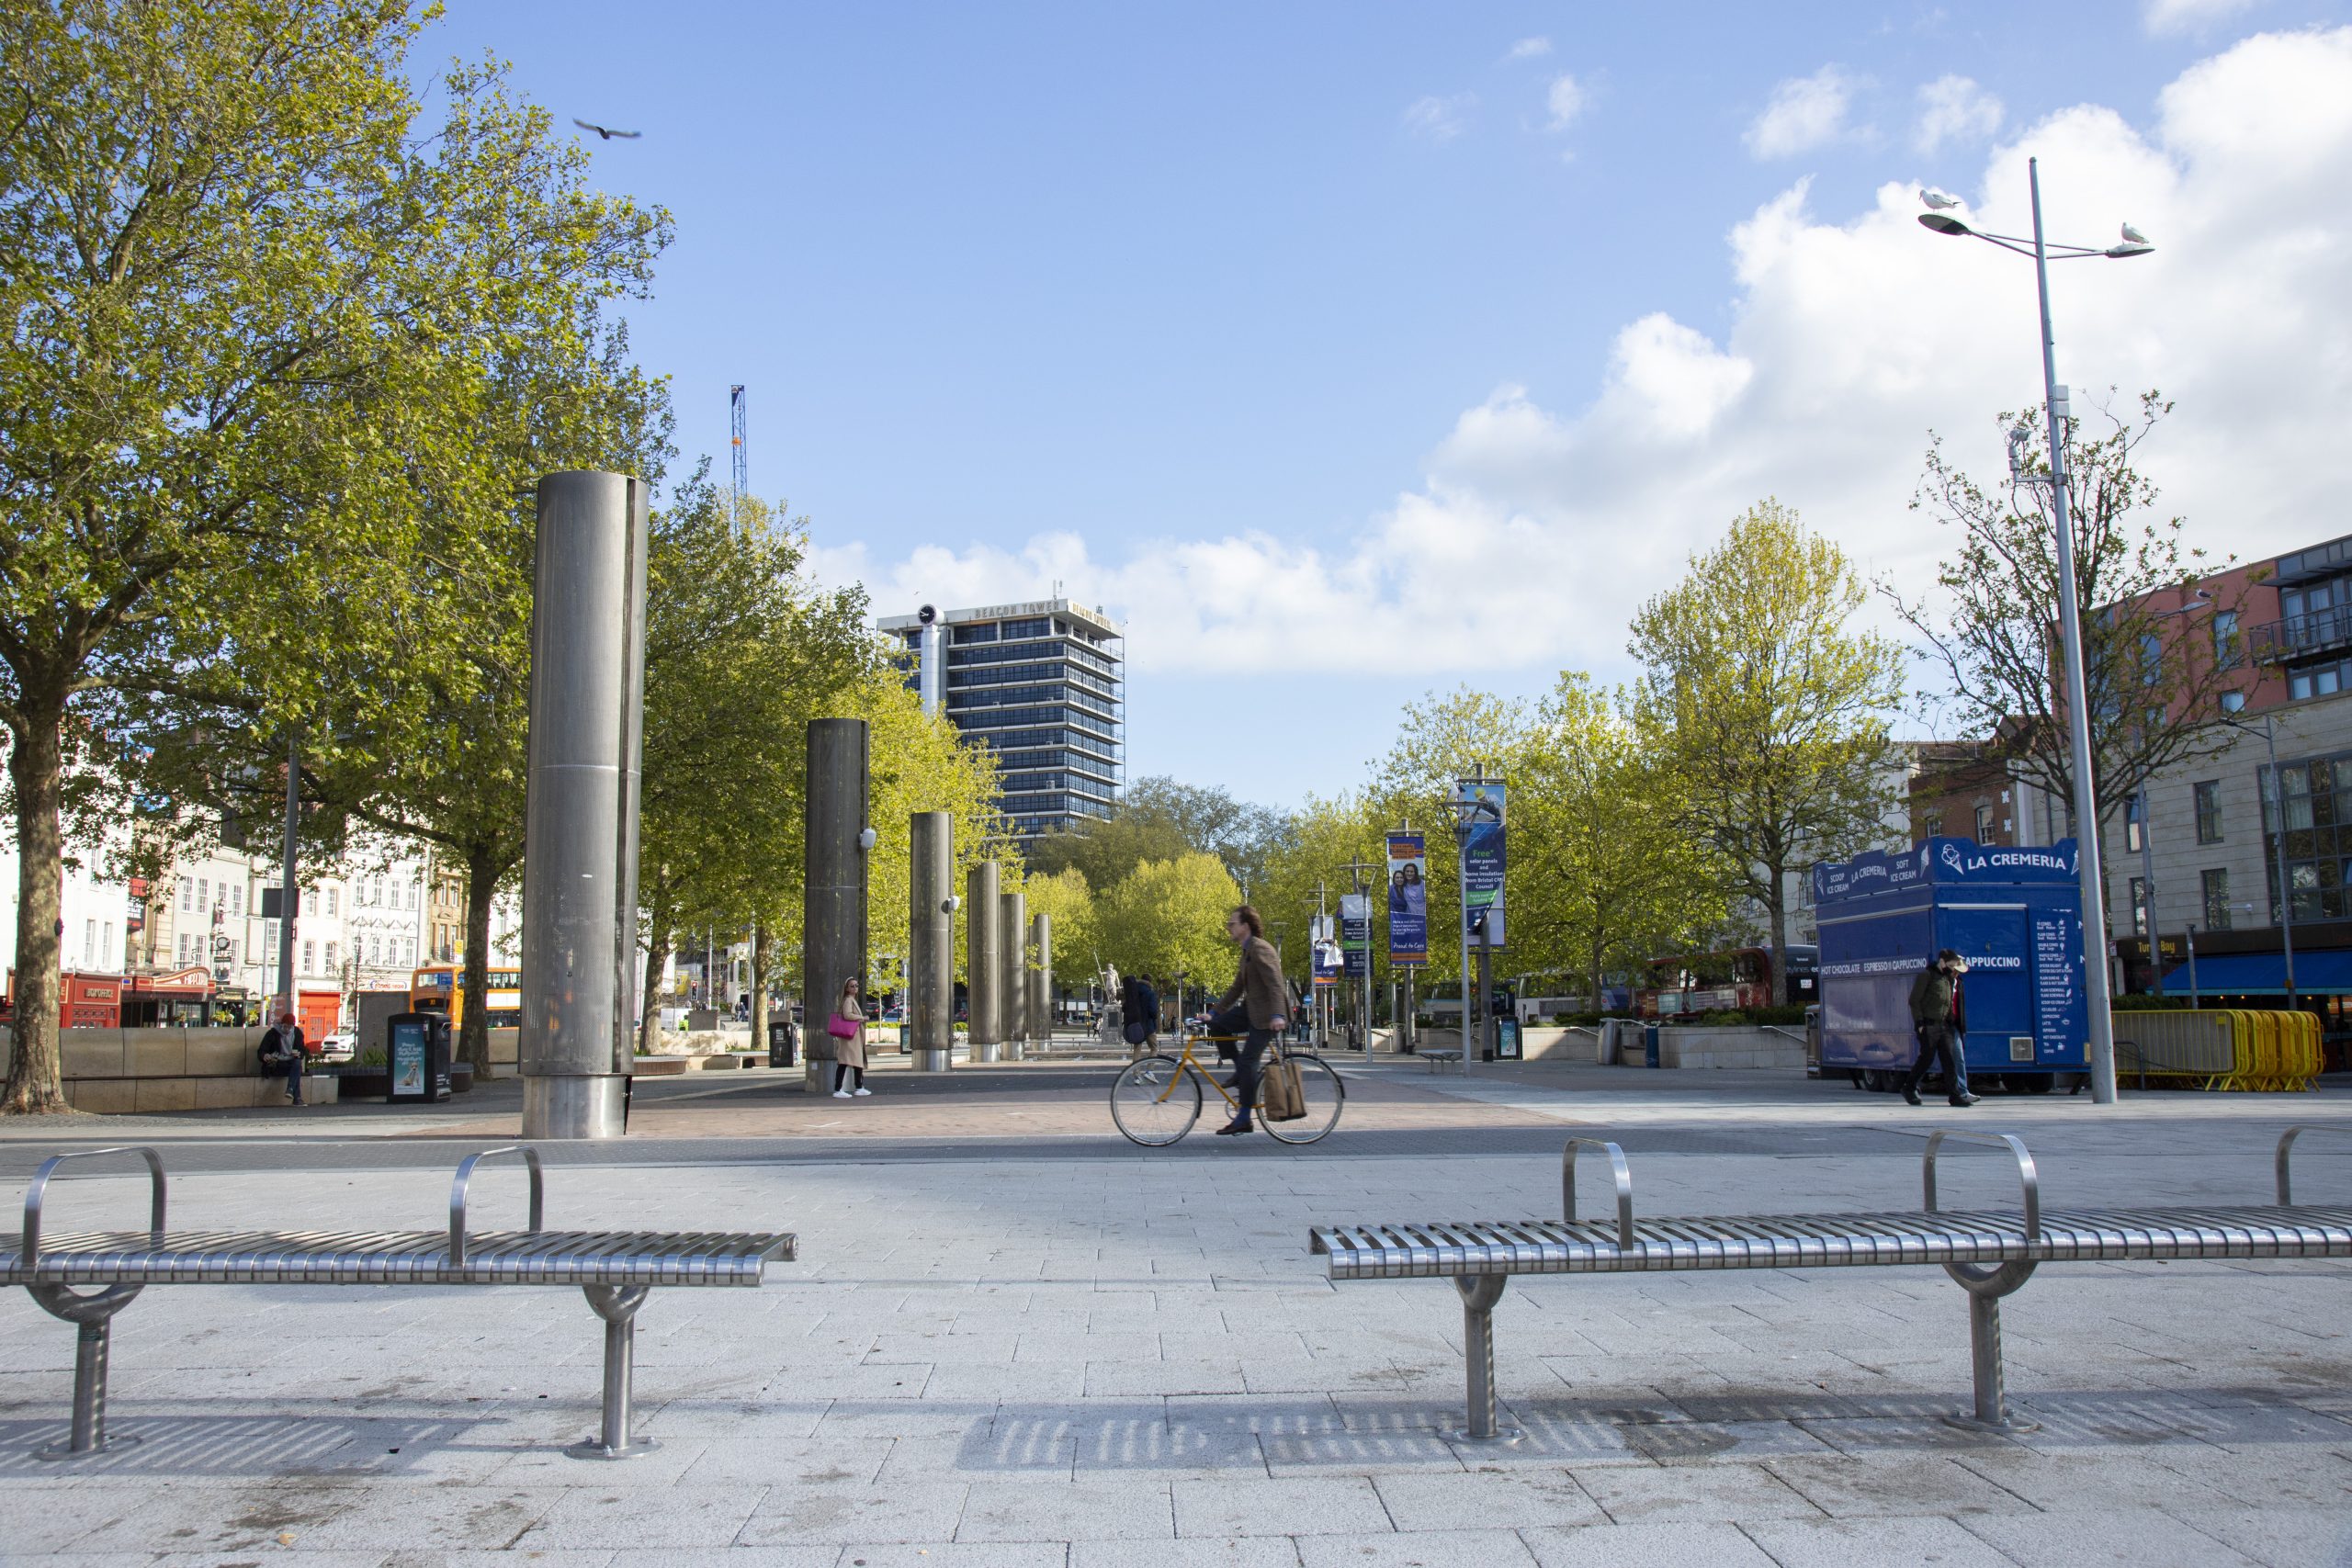 Bristol City Centre view with trees, buildings, benches and members of the public.